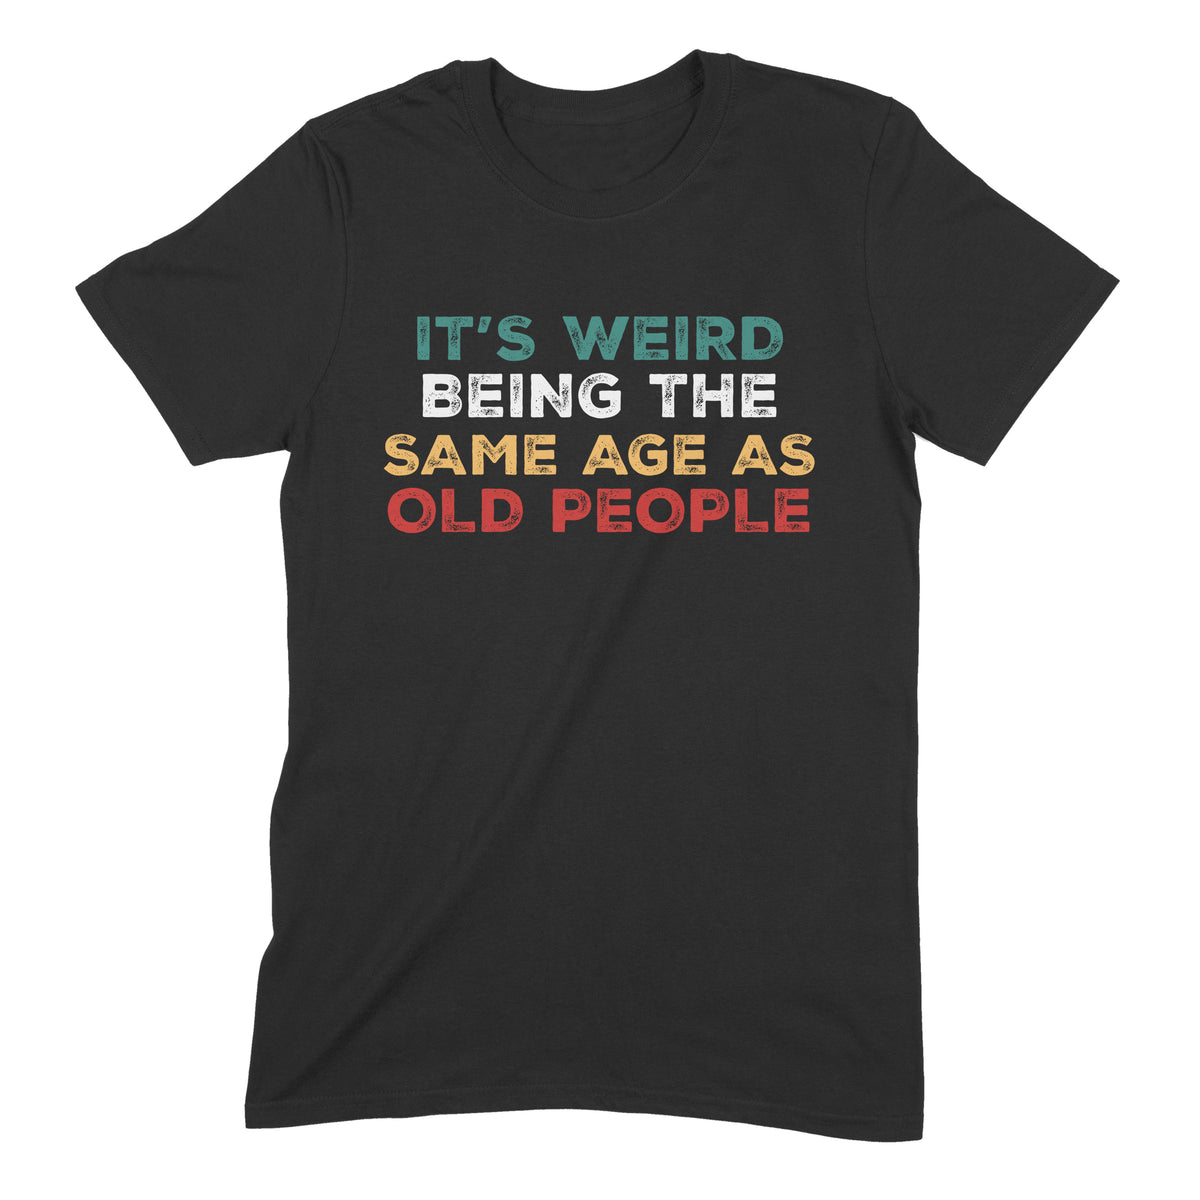 "Weird To Be The Same Age" Premium Midweight Ringspun Cotton T-Shirt - Mens/Womens Fits